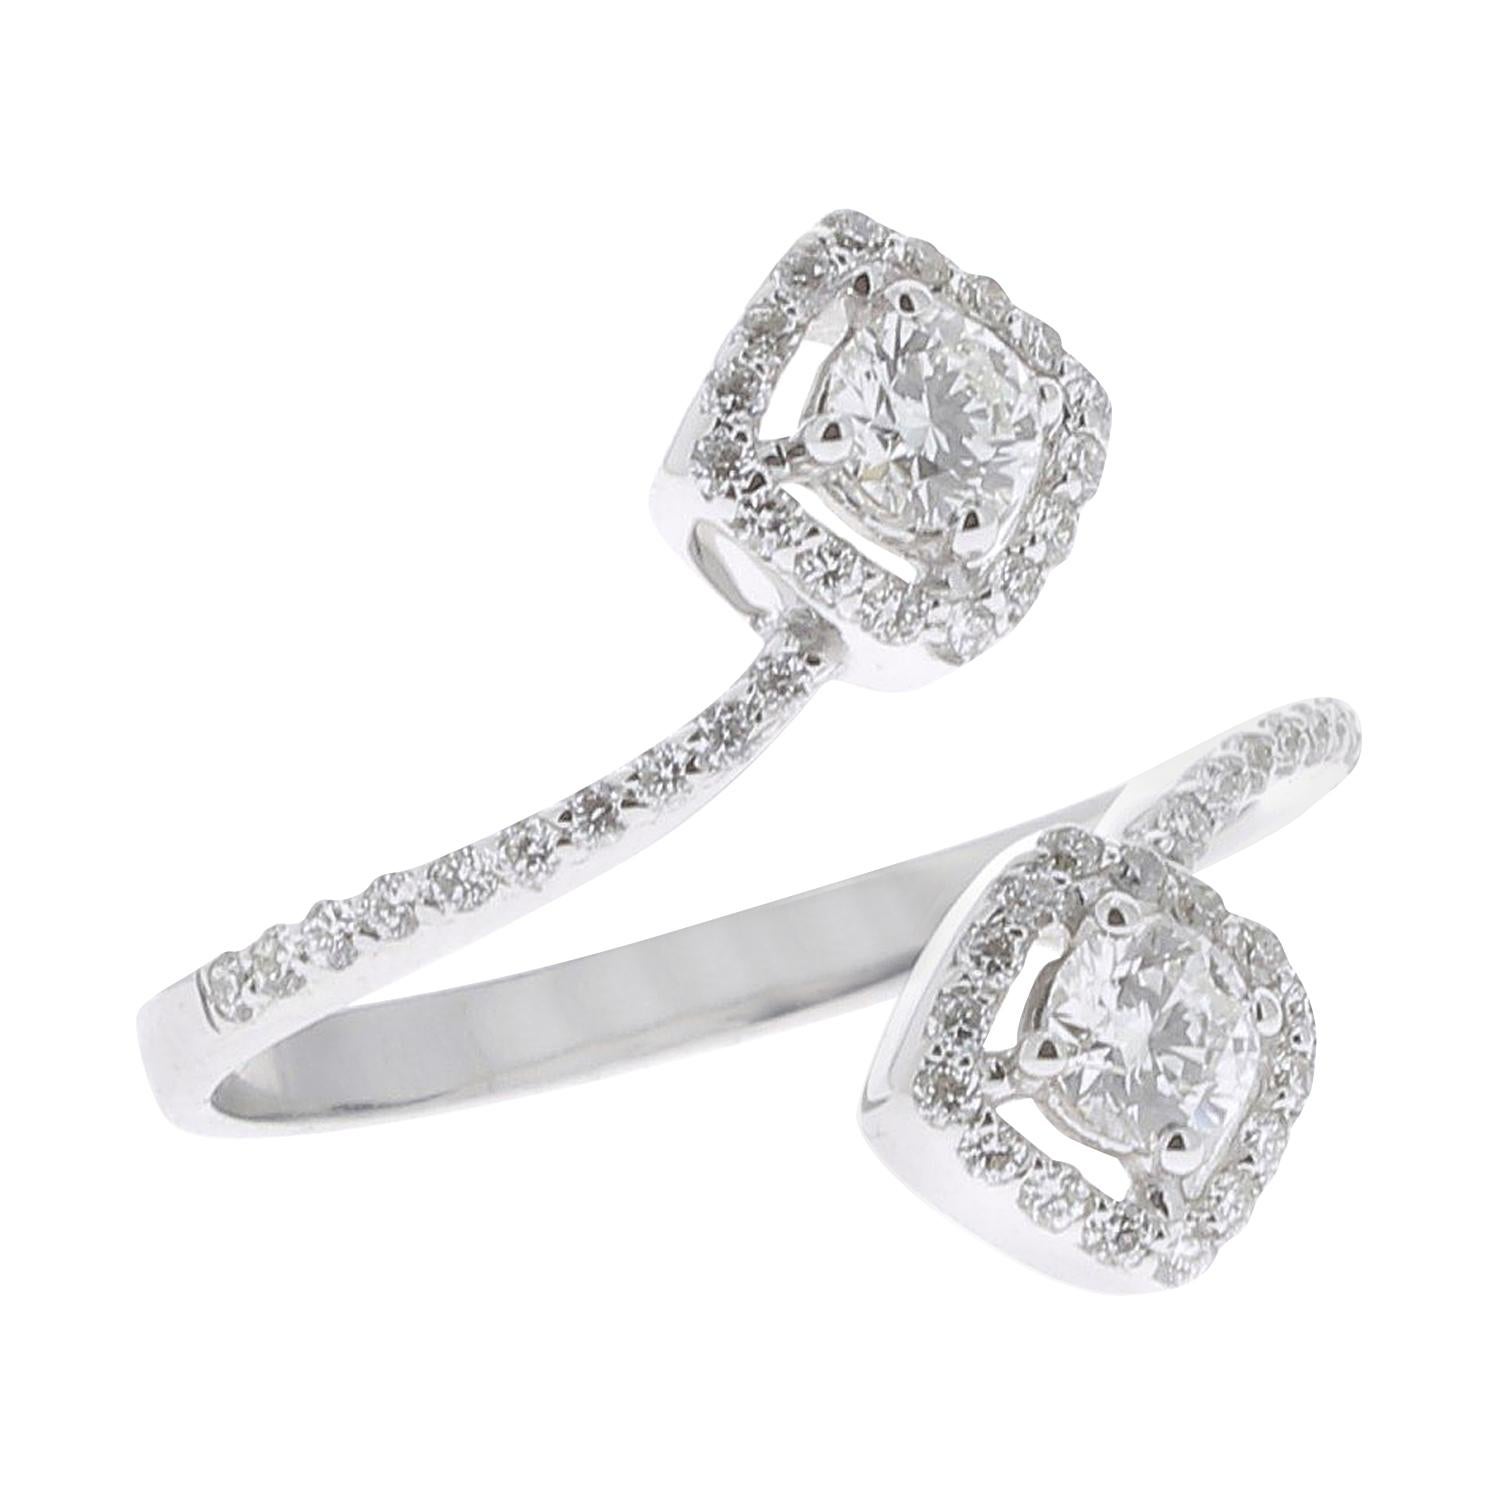 The Square Diamond Ring is a unique and trendy model set with 0.66 carats of GVS Diamond.
The Square Diamond ring is set with brilliants that wraps gracefully around the finger and whose end is punctuated with 2 diamonds on each side.
The Ring is